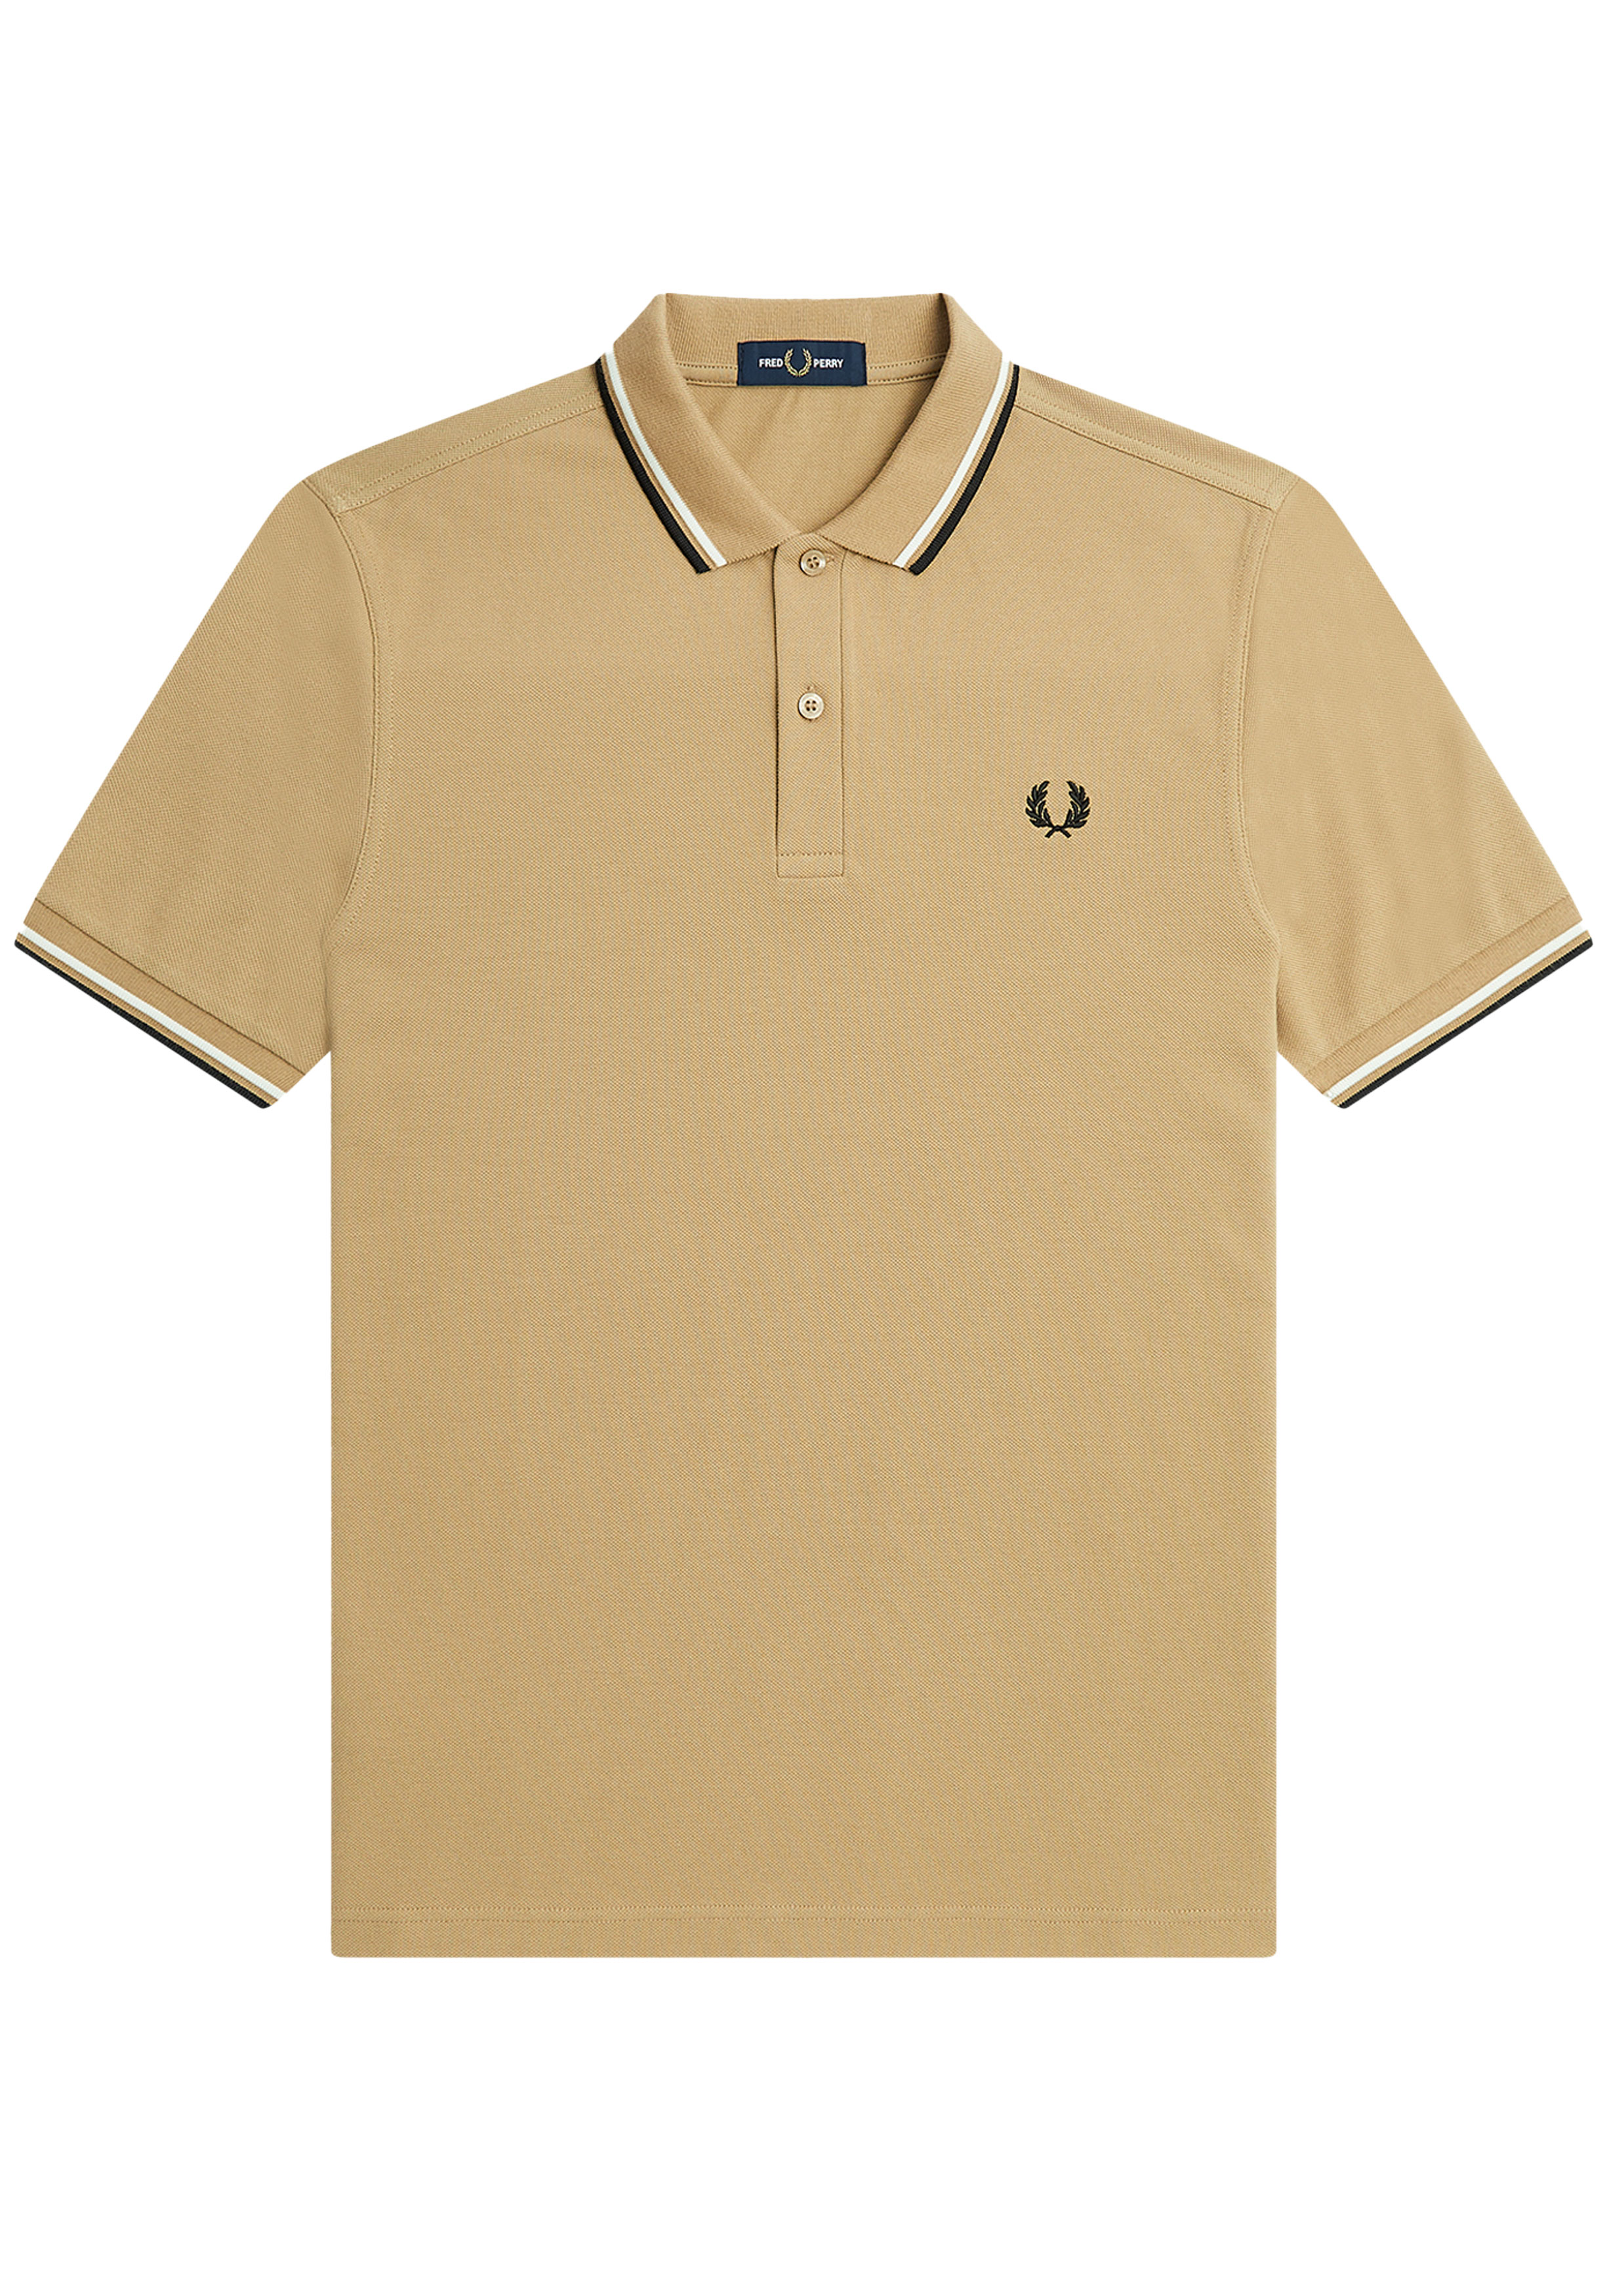 Fred Perry M3600 polo twin tipped shirt, pique, Warm Stone / Snow White / Black